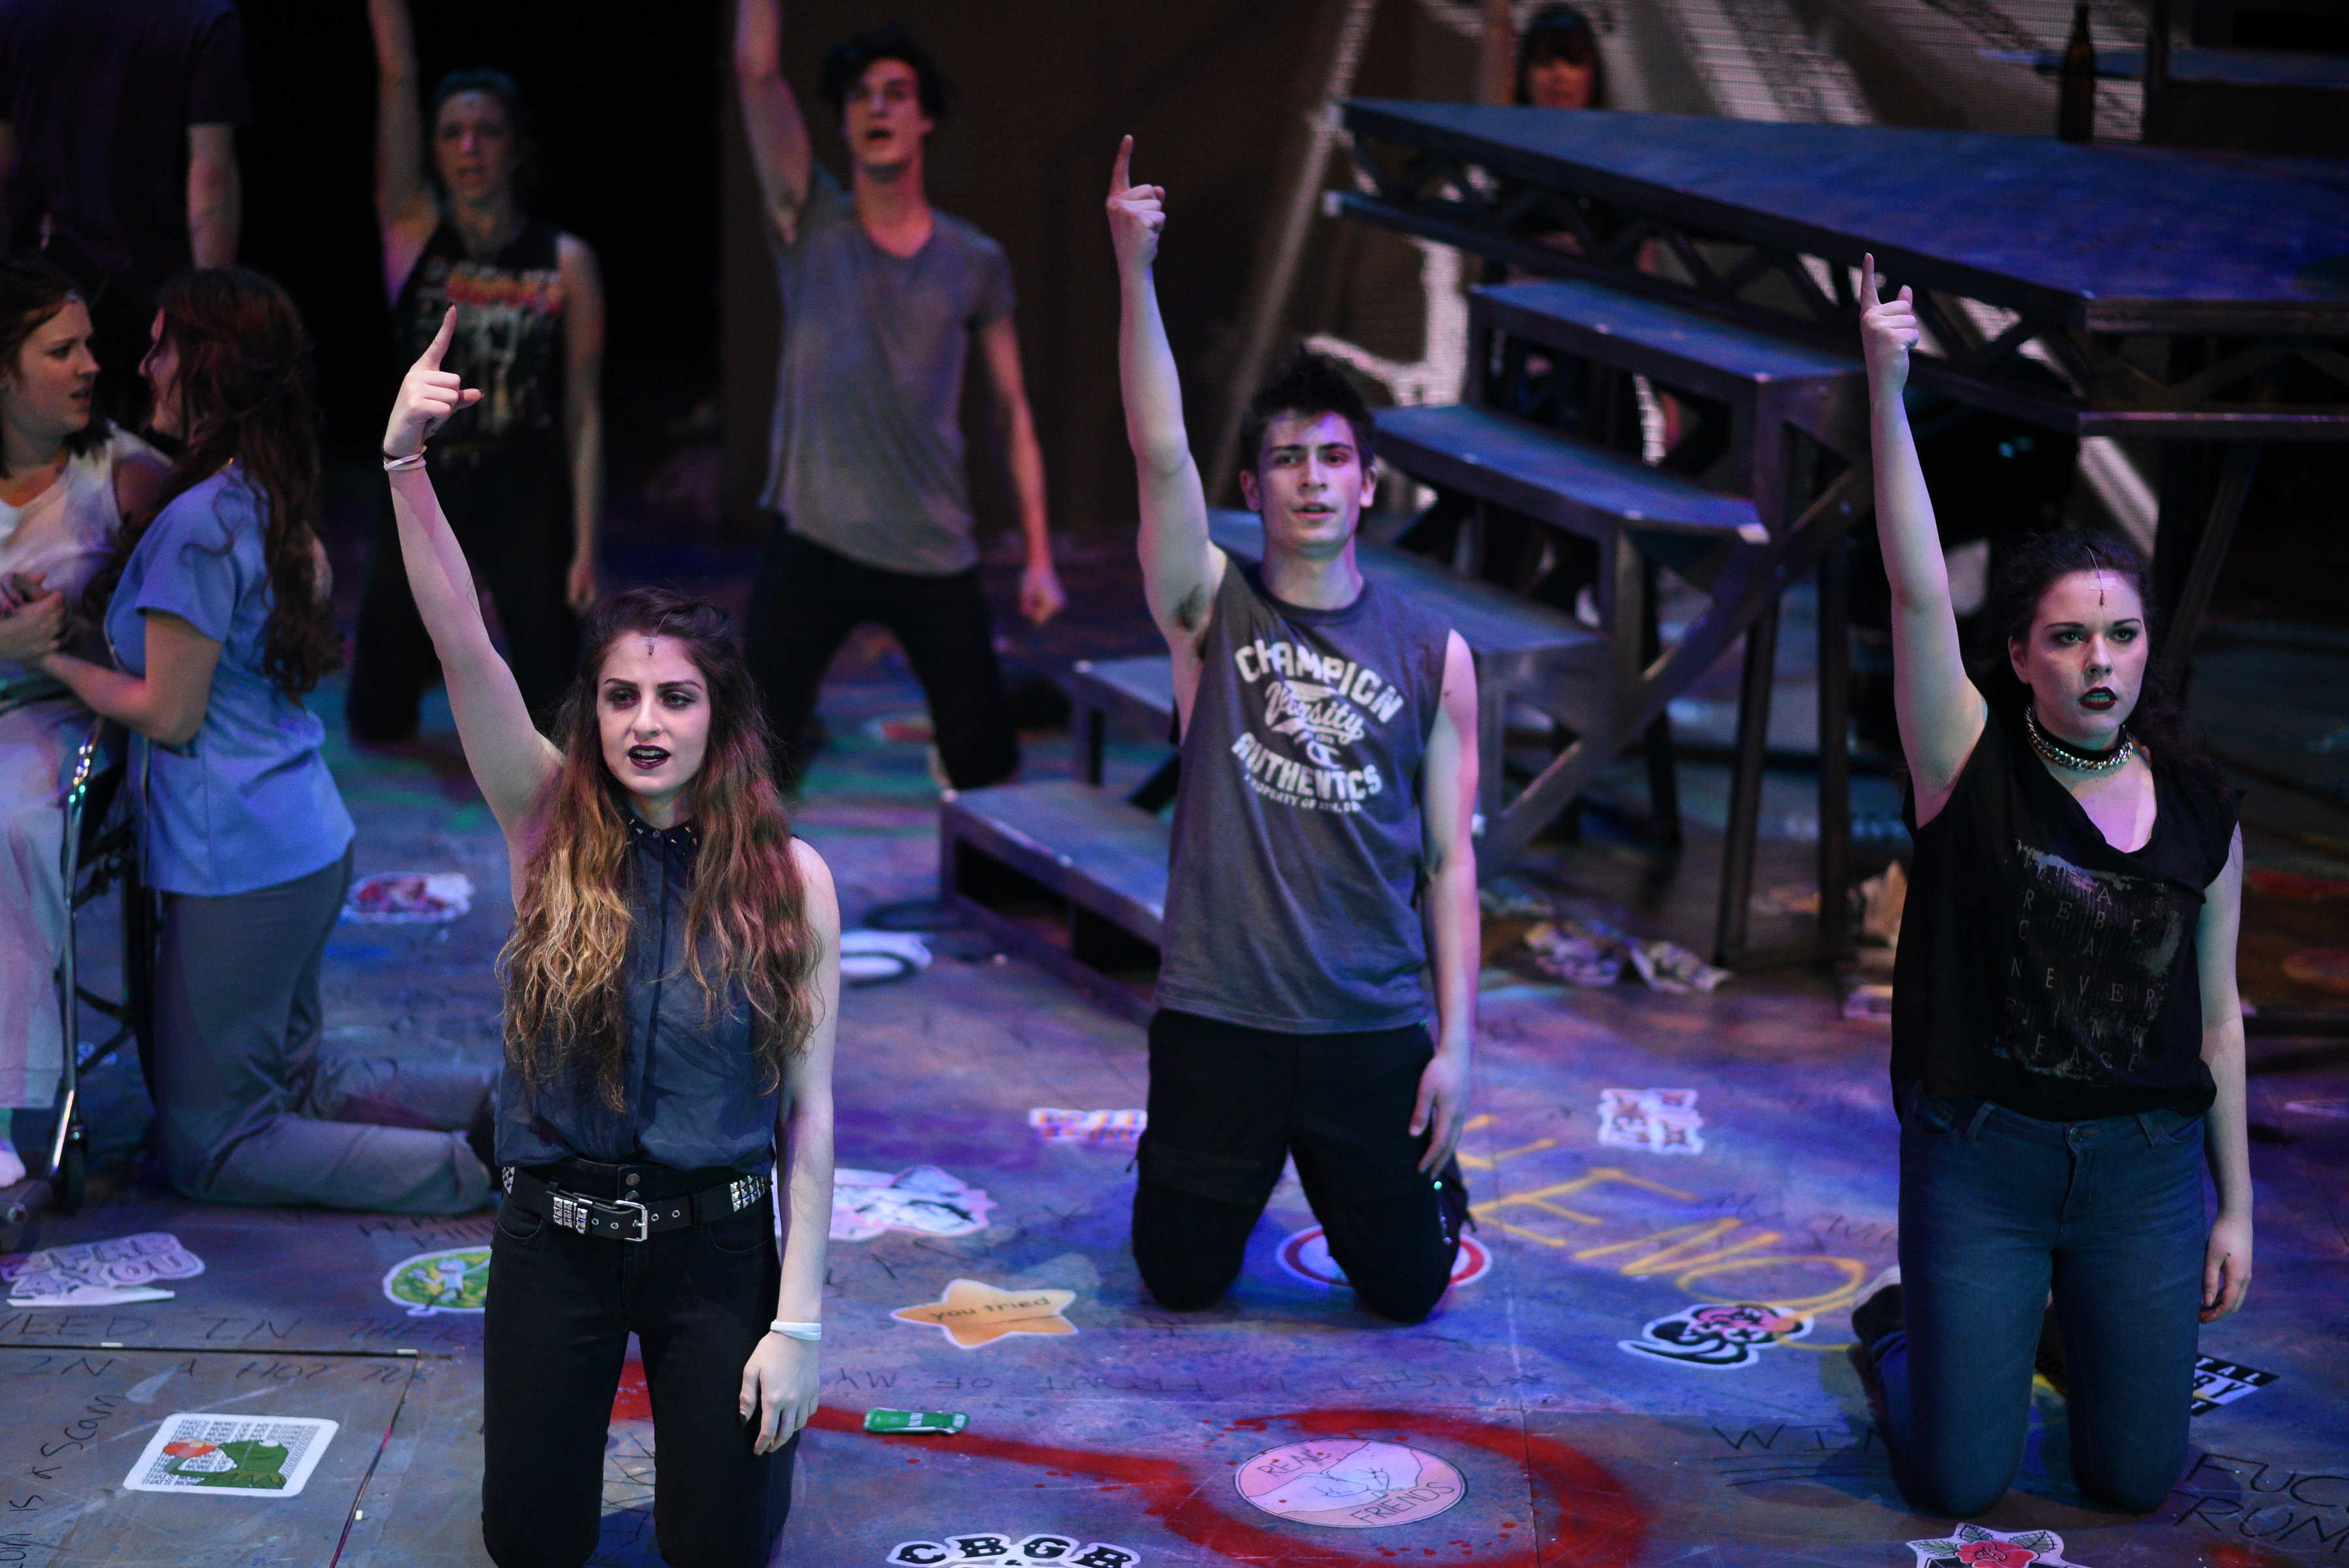 American Idiot Production at MSU 2018 - Musical Theatre Acting and Voice Teacher Needed